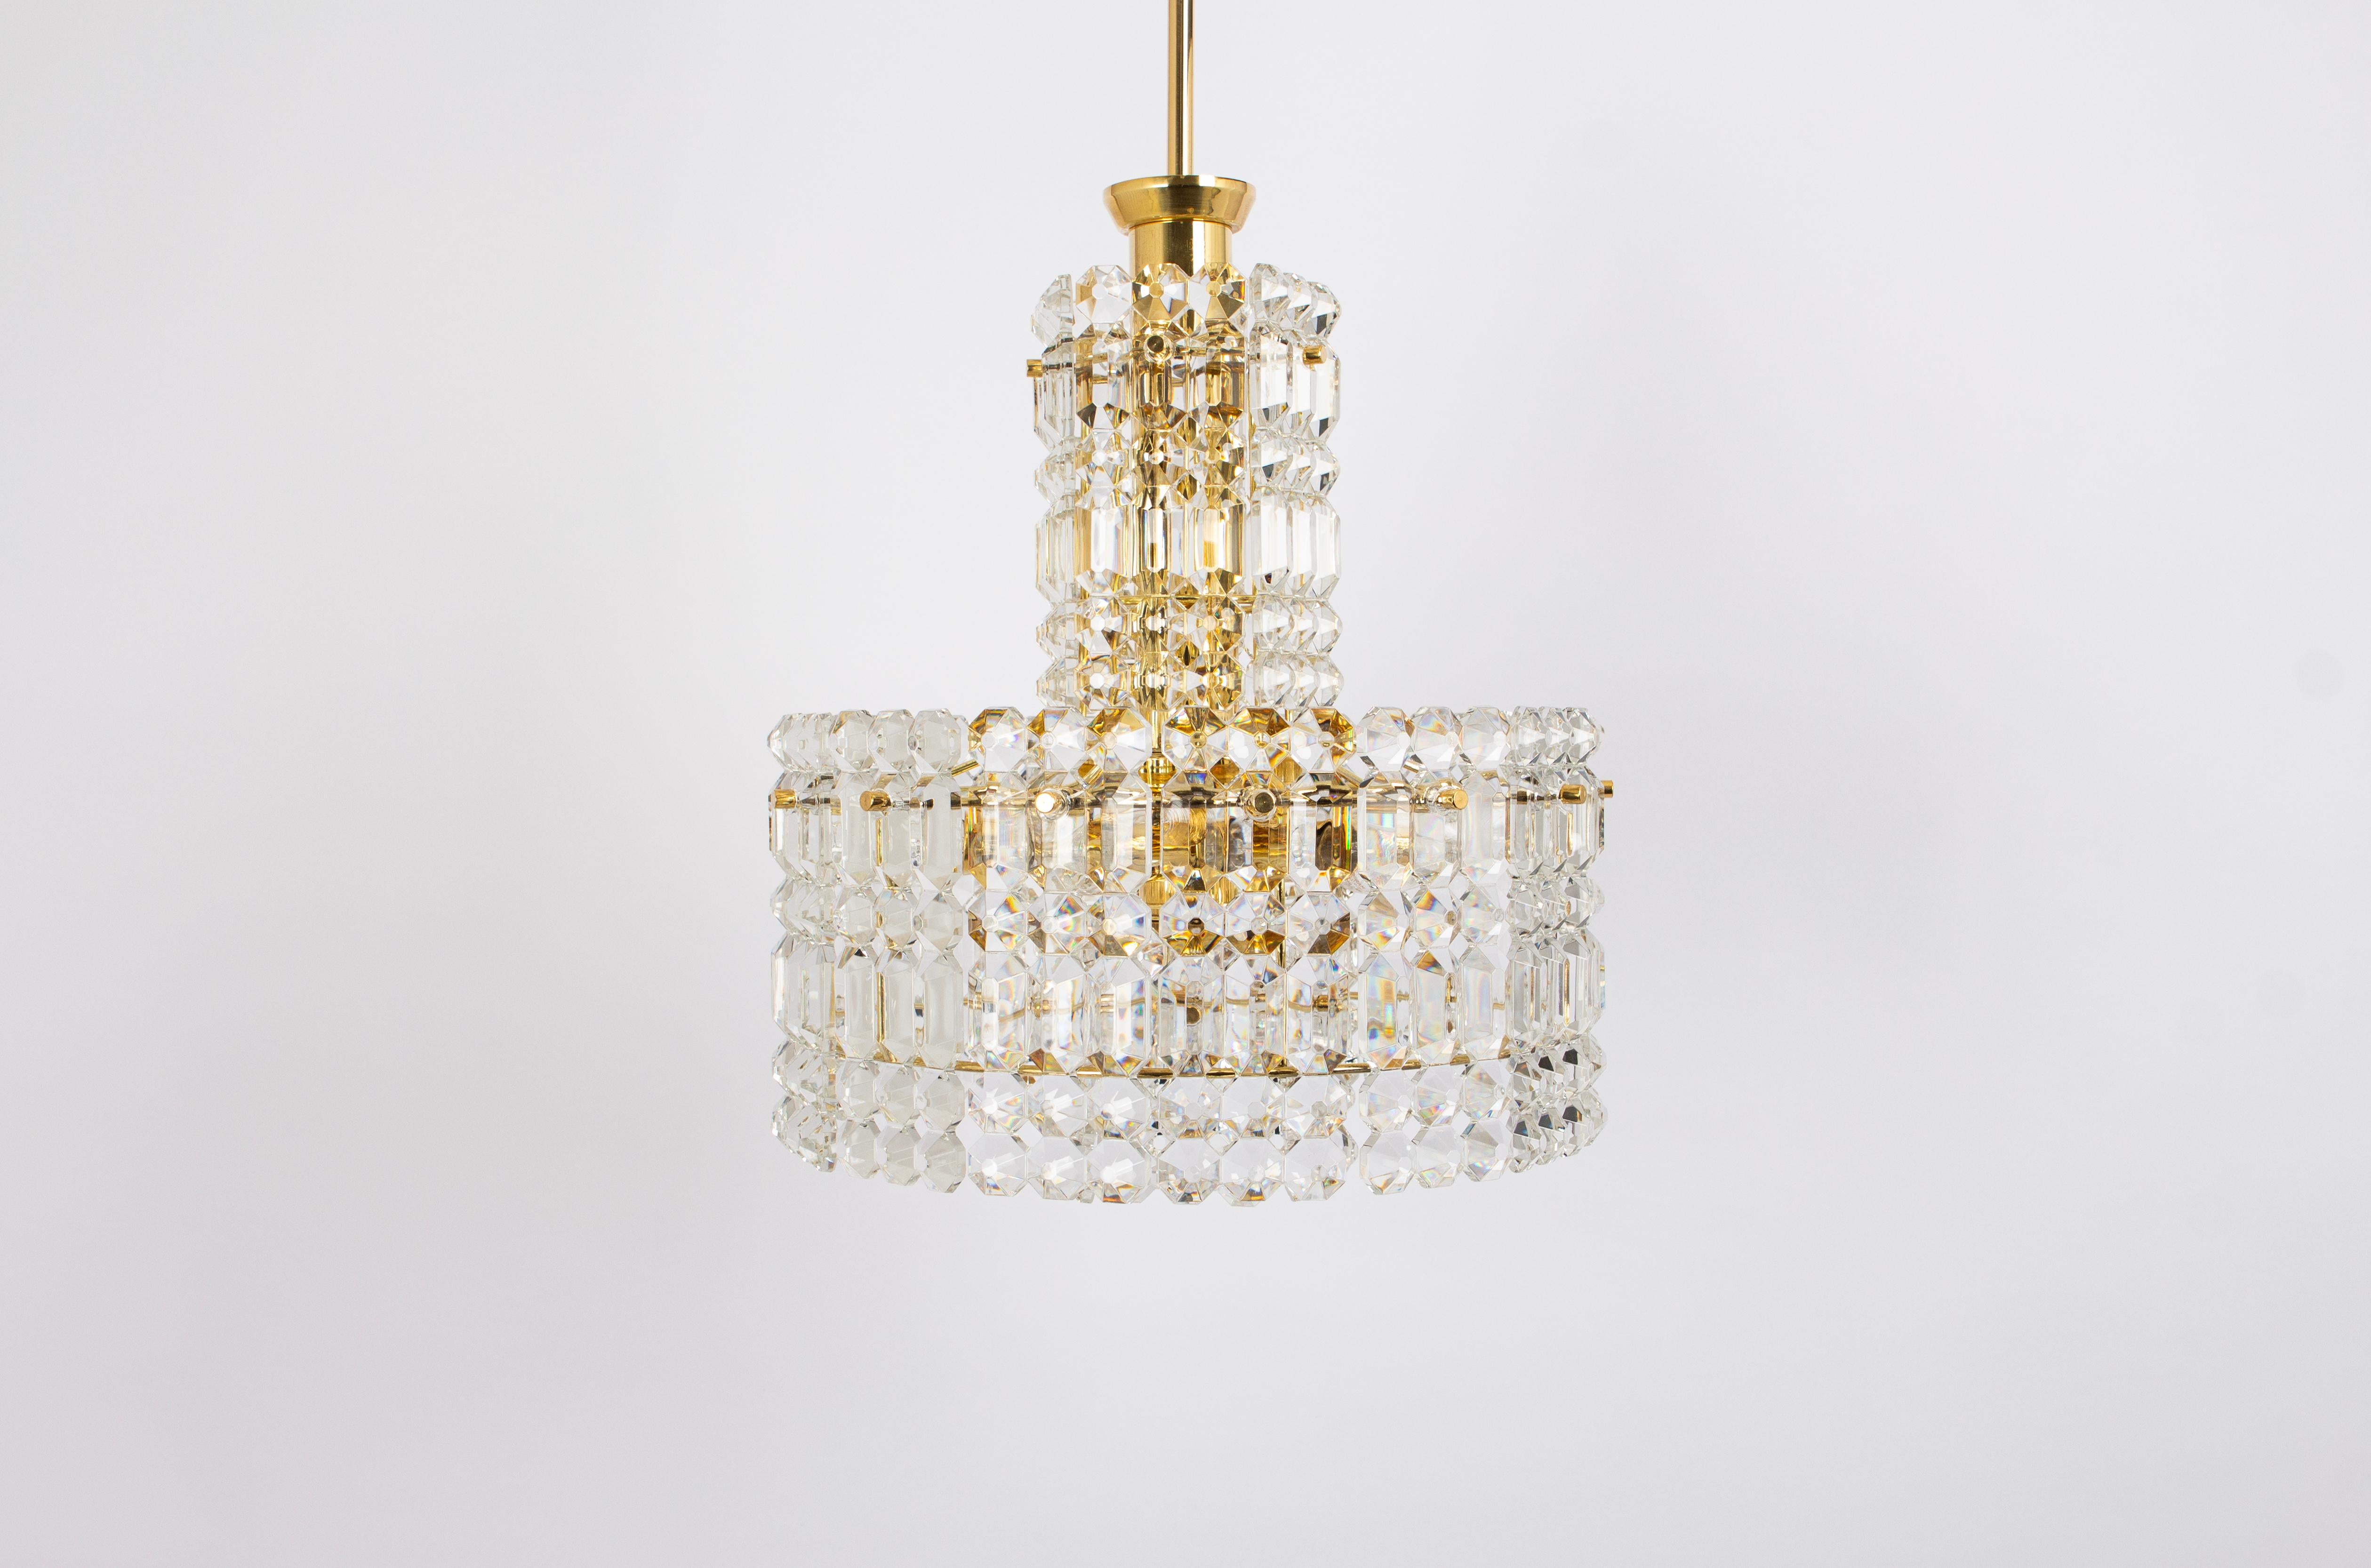 Stunning Chandelier, Brass and Crystal Glass by Kinkeldey, Germany, 1970s For Sale 3